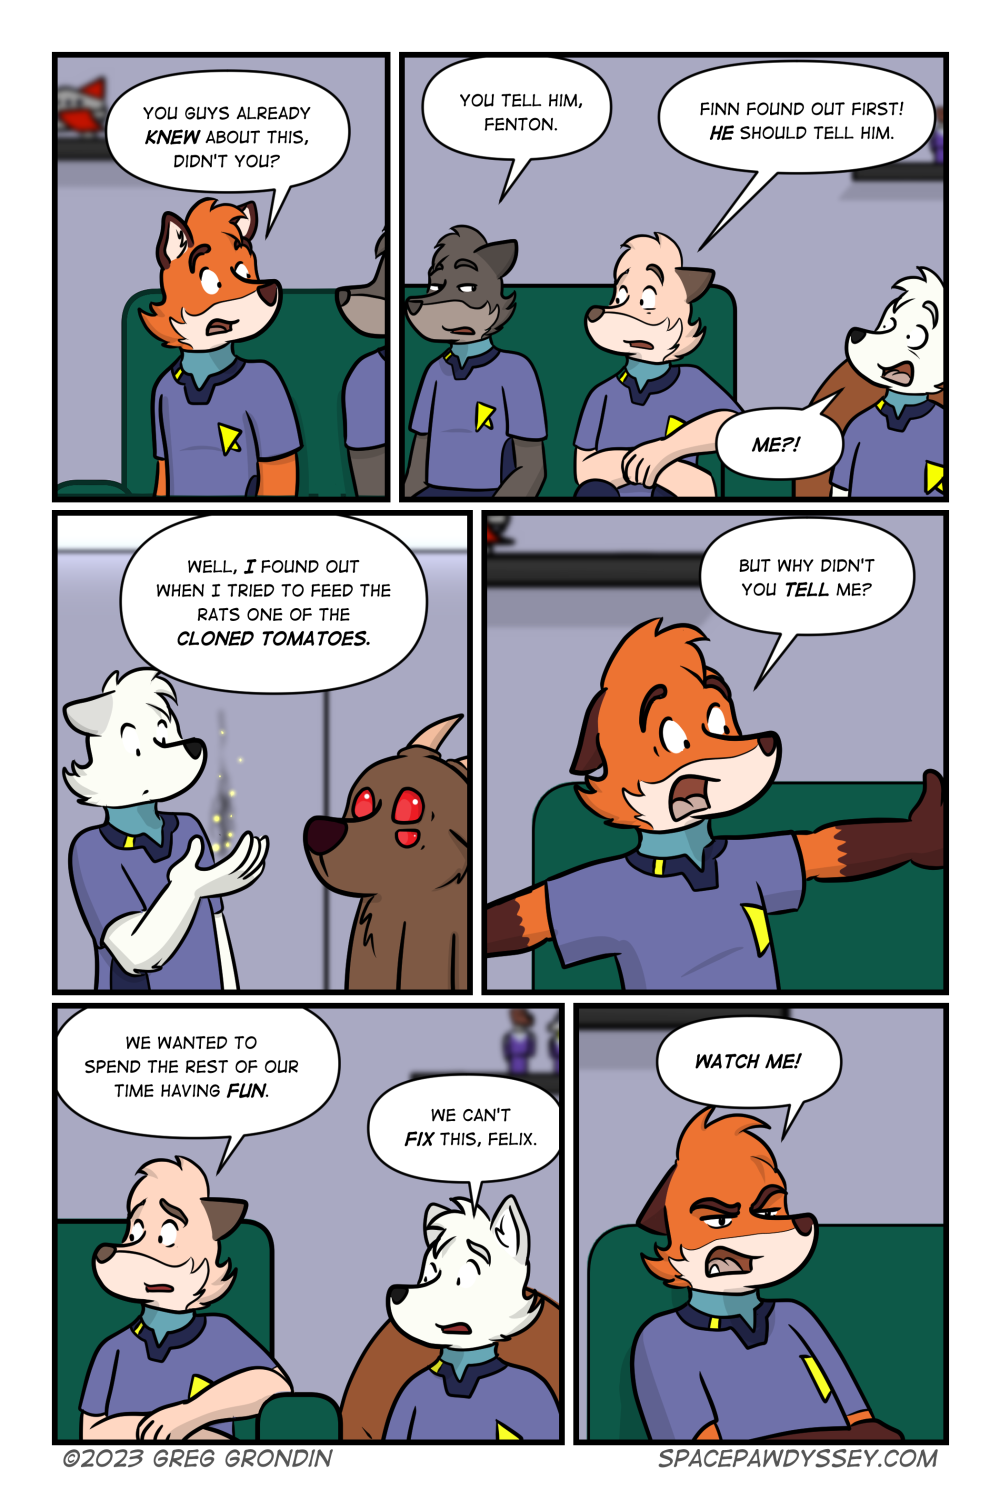 Space Pawdyssey #630